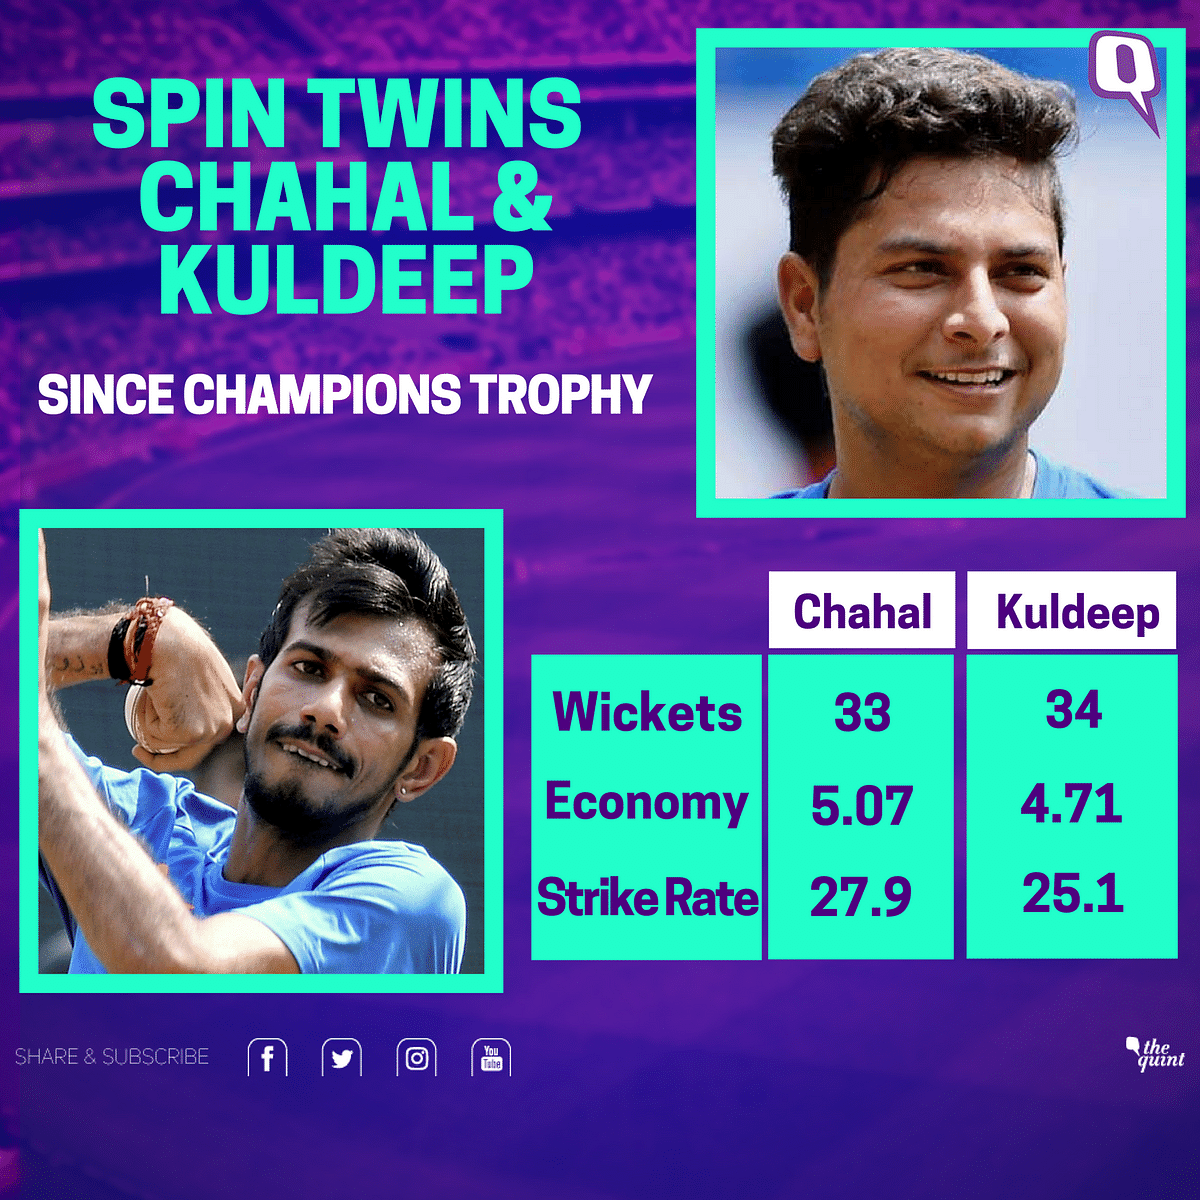 Chahal and Kuldeep have taken 33 and 34 wickets respectively at averages of 23.66 and 19.79 since their debut.